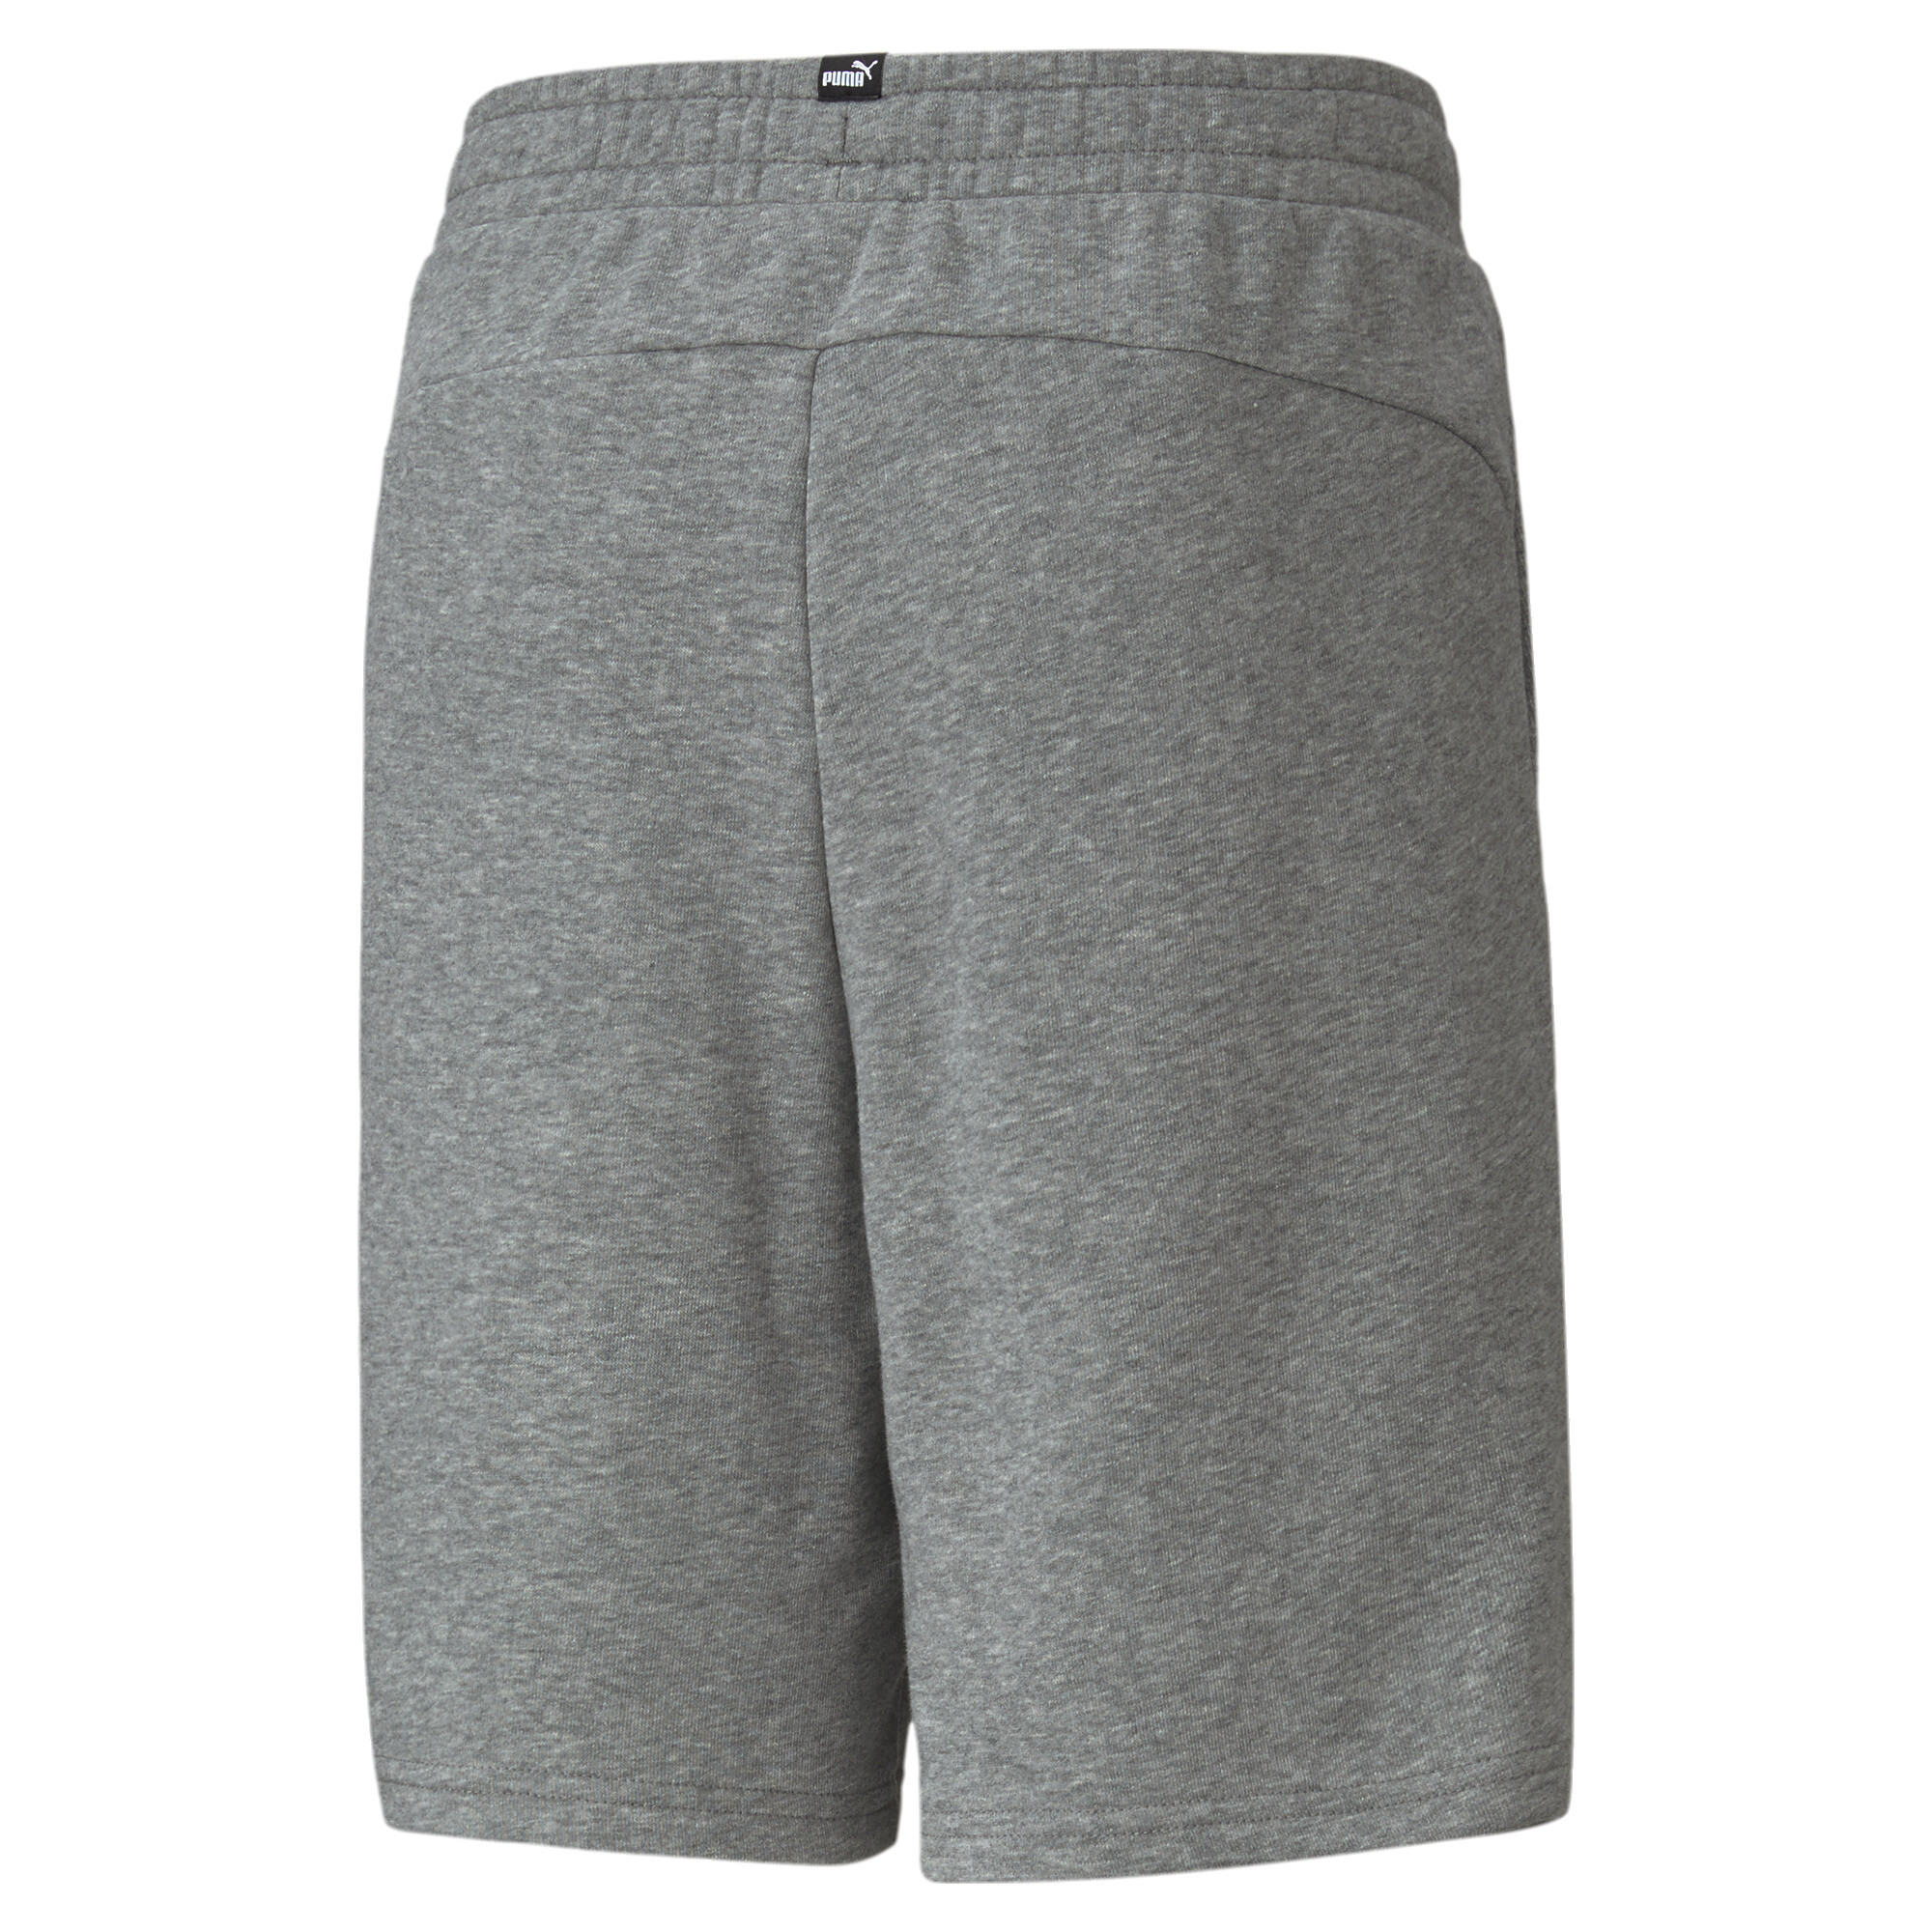 PUMA Essentials Sweat Shorts In Heather, Size 11-12 Youth